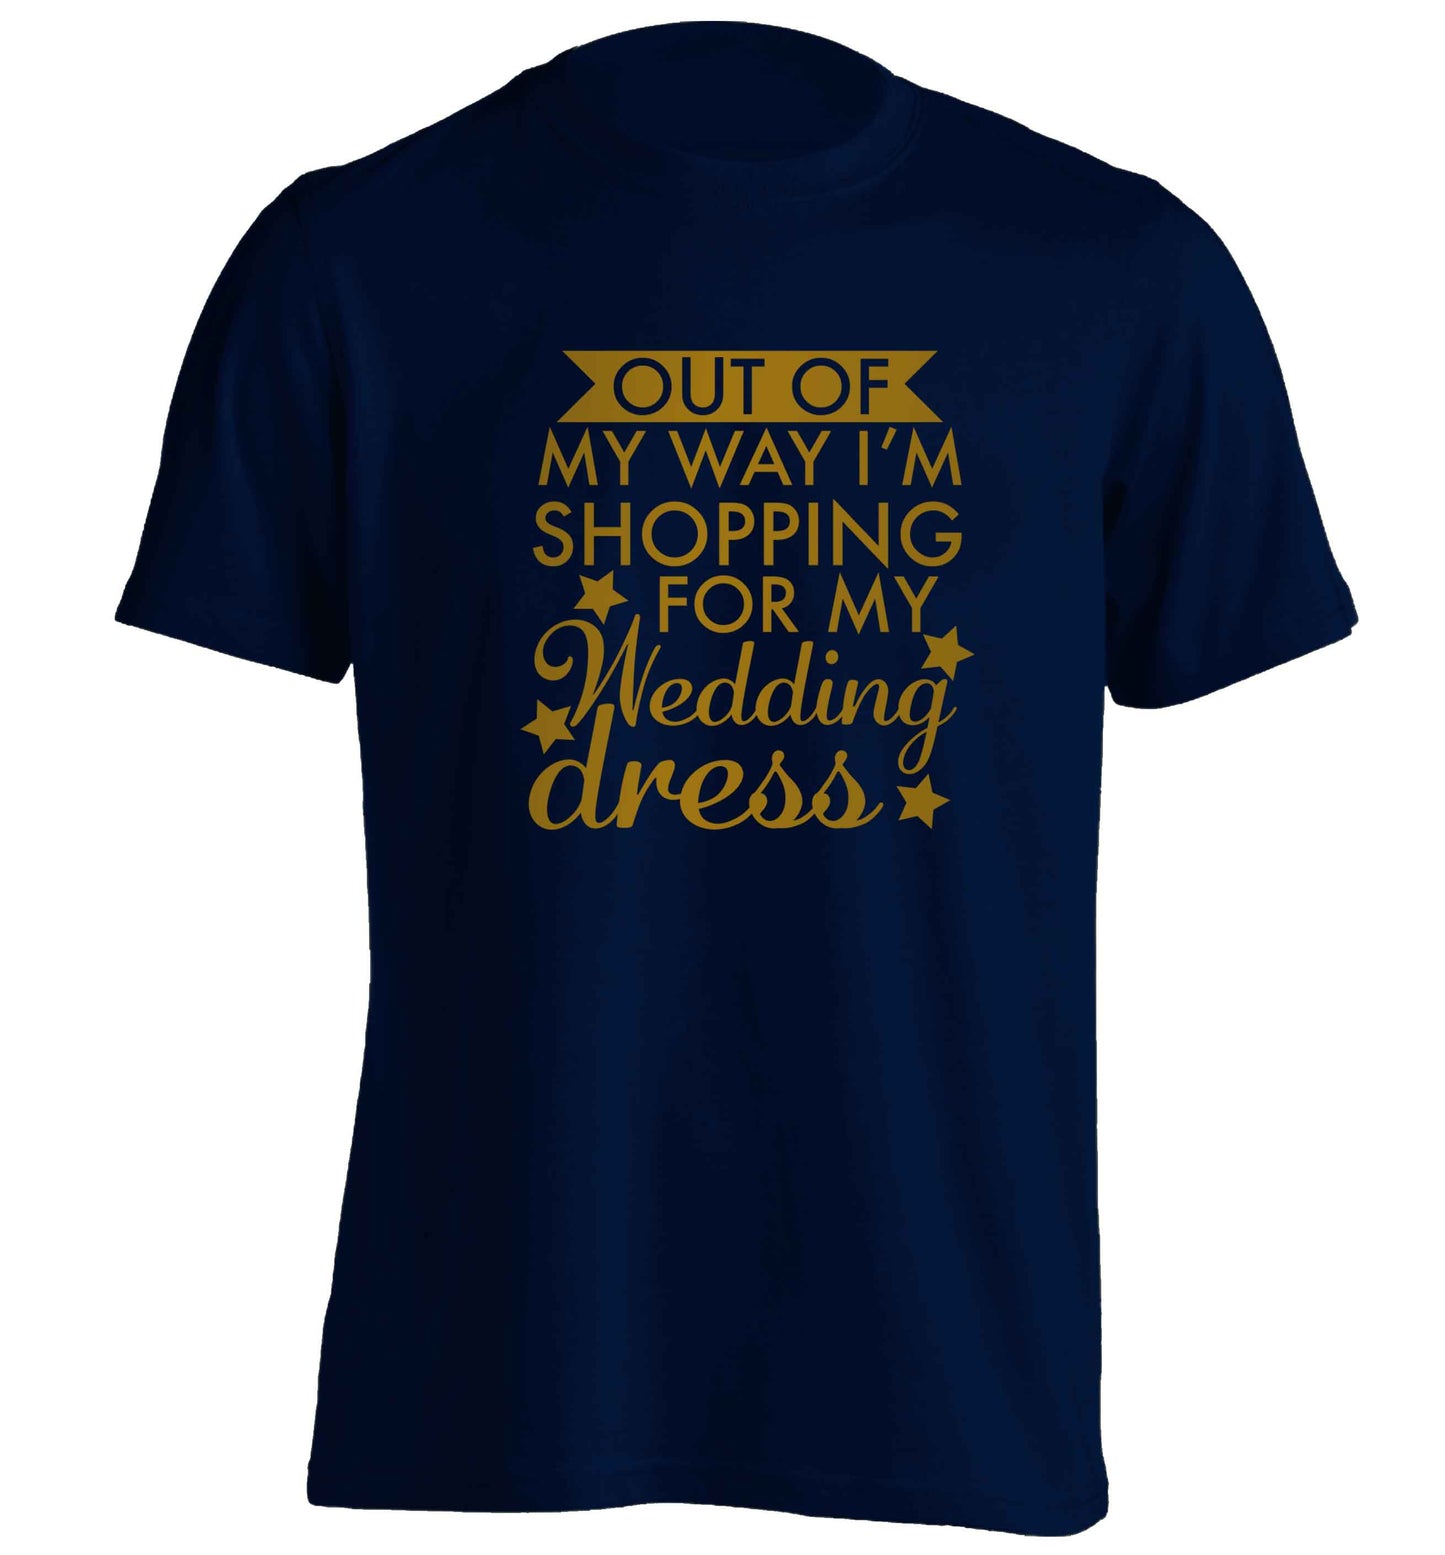 Out of my way I'm shopping for my wedding dress adults unisex navy Tshirt 2XL